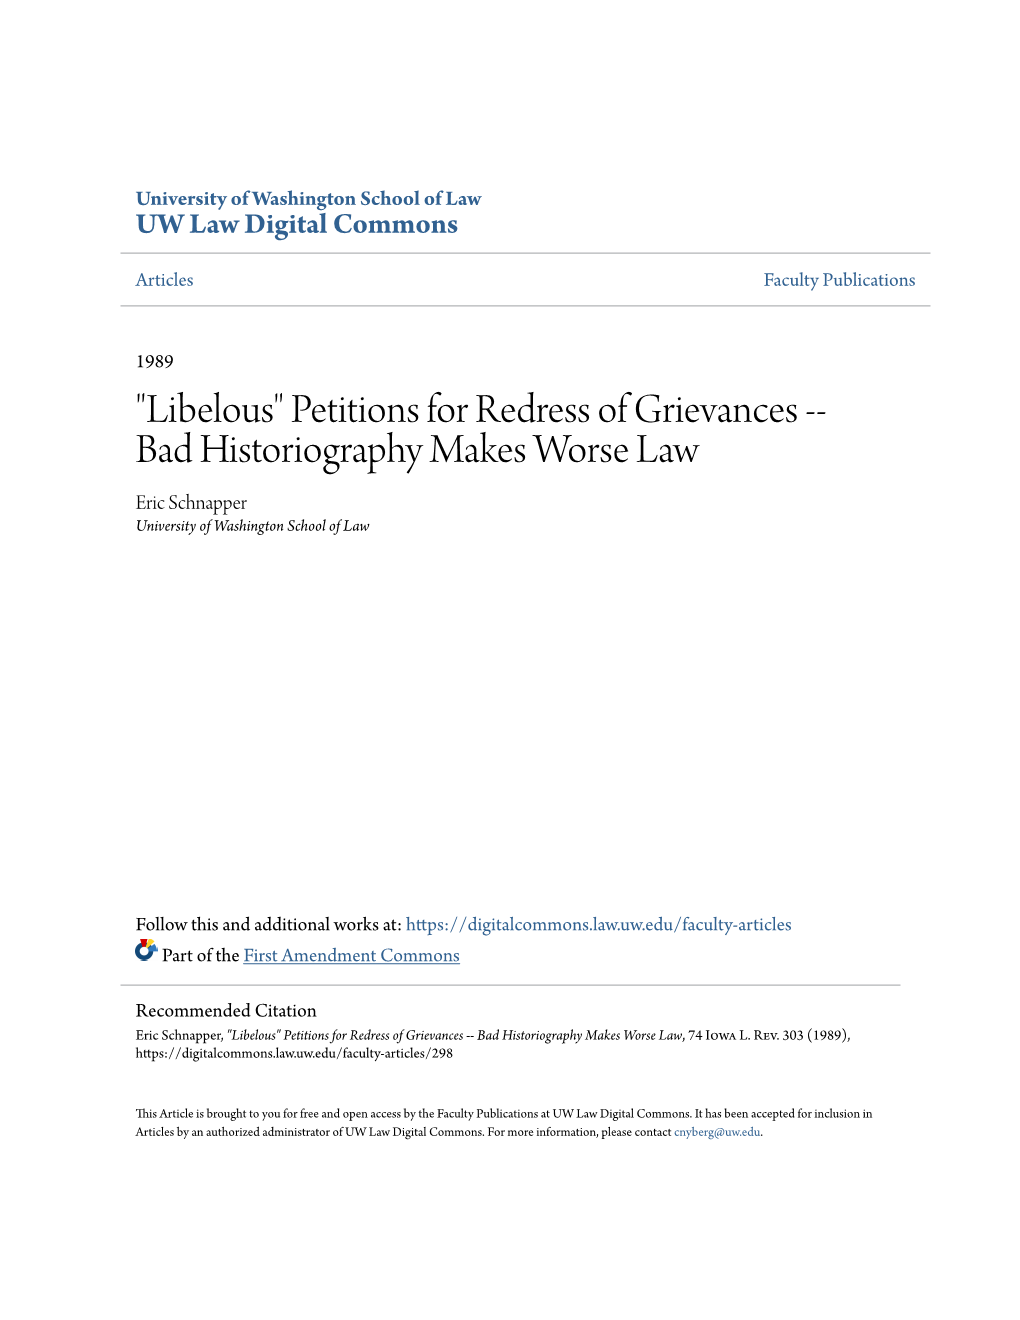 Petitions for Redress of Grievances -- Bad Historiography Makes Worse Law Eric Schnapper University of Washington School of Law